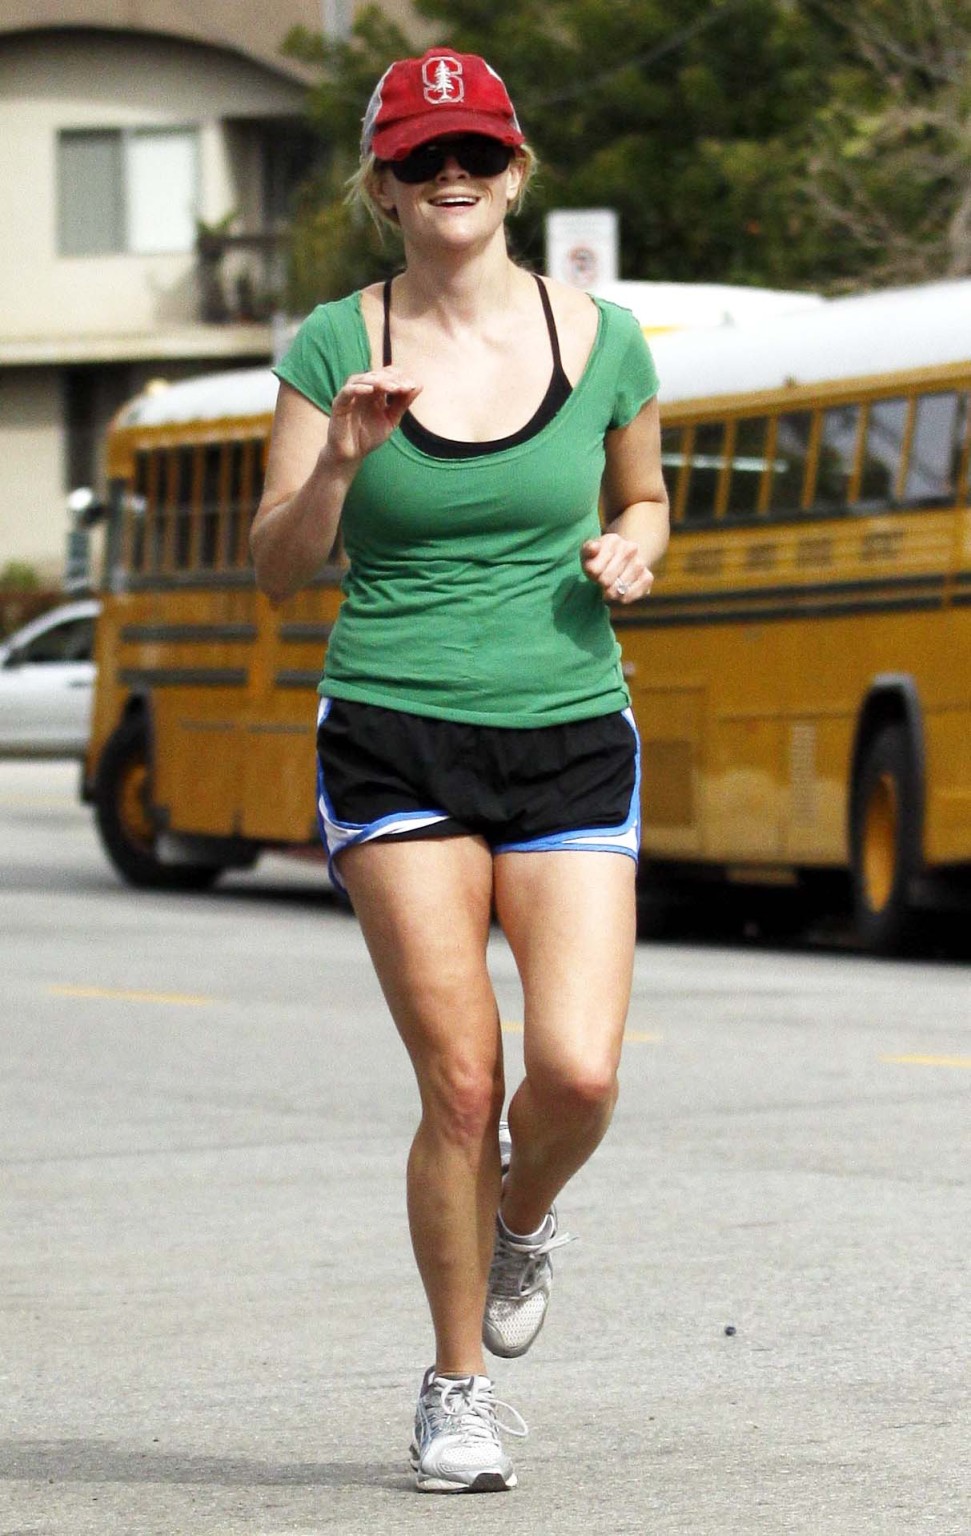 Reese Witherspoon langbeinig in Shorts beim Joggen in Brentwood
 #75312786